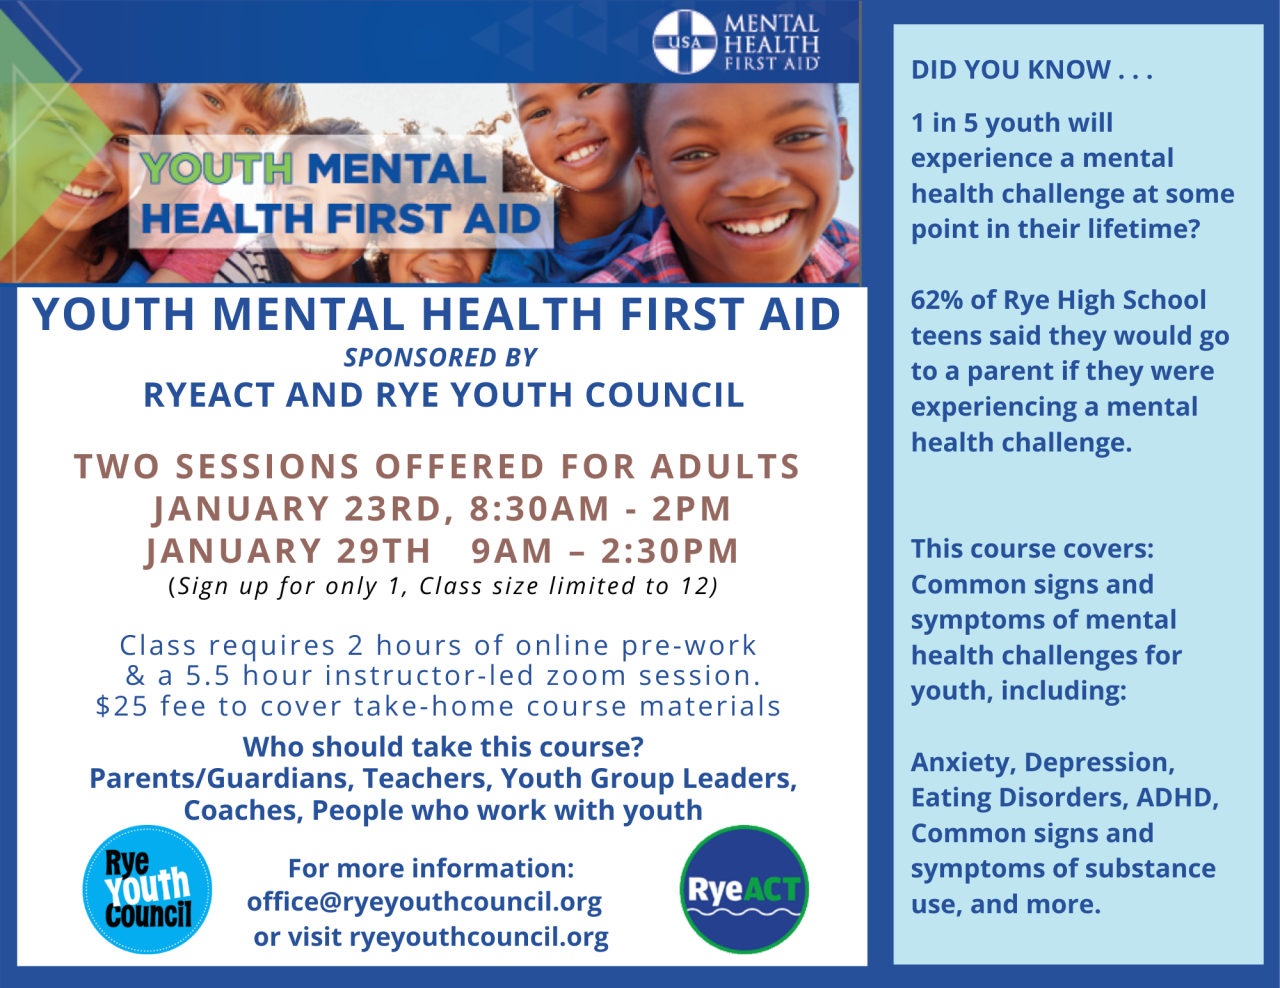 Mental aid health first youth algee plan action person